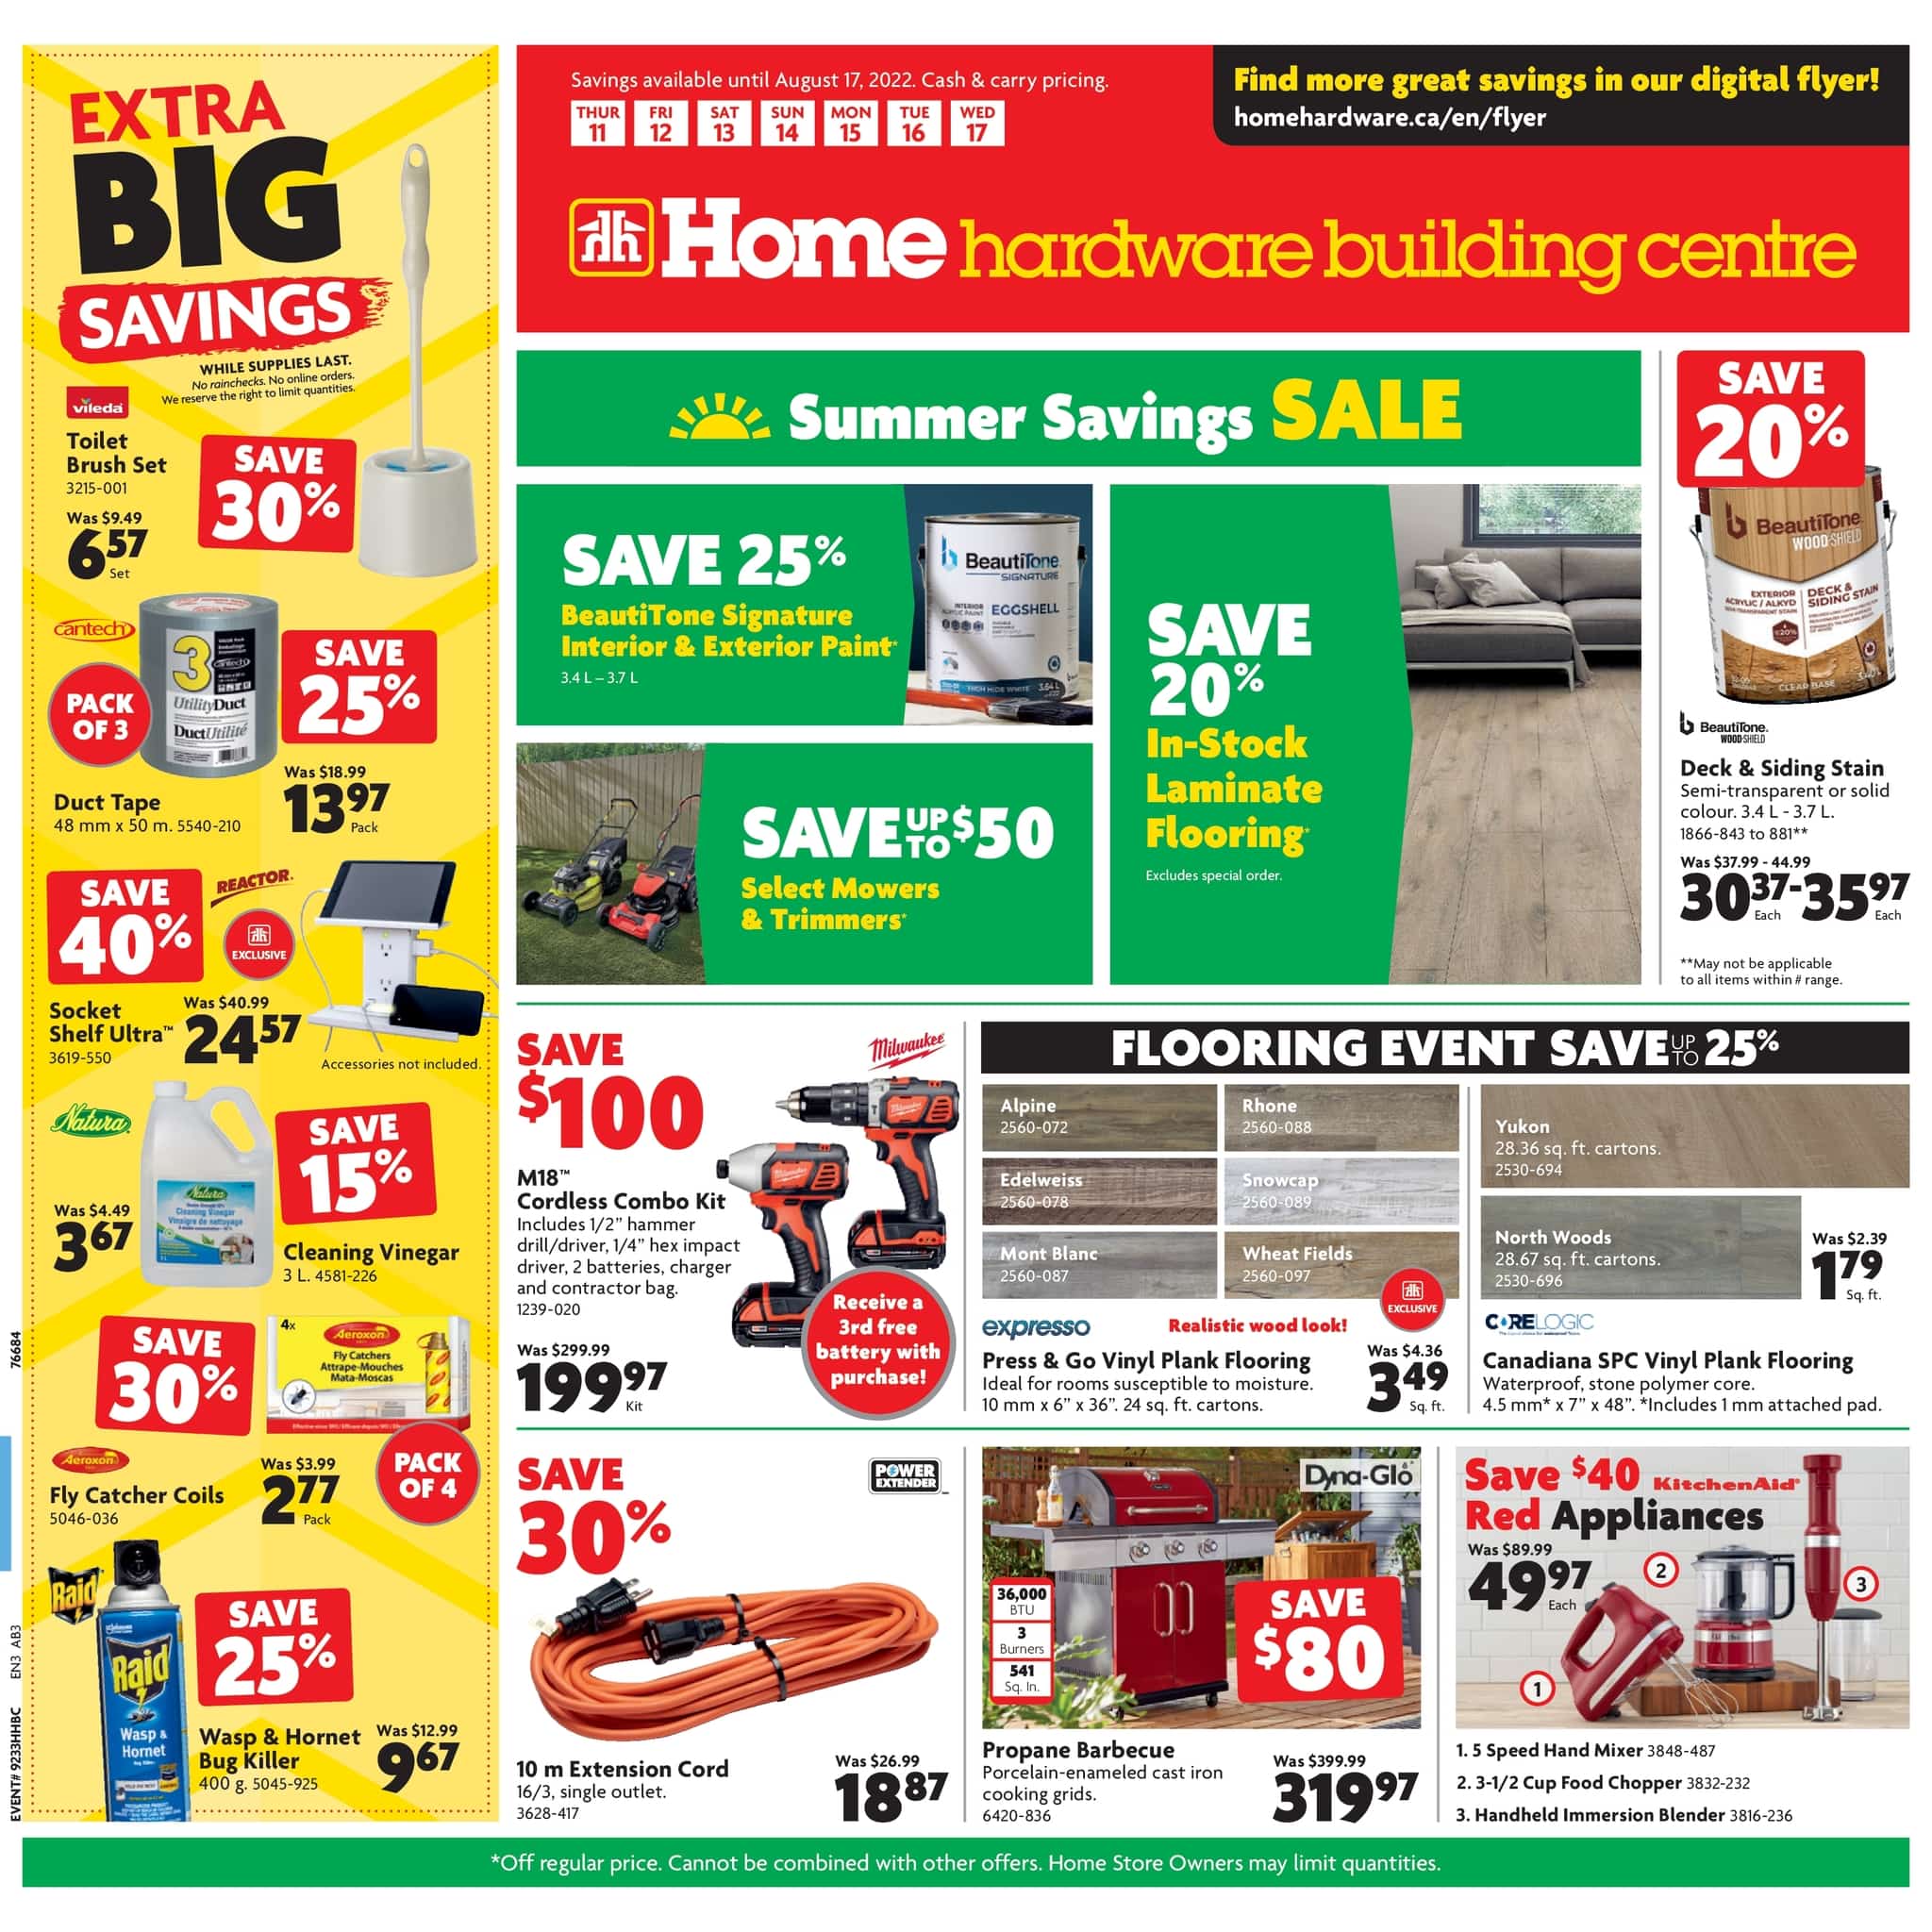 Home Hardware - Building Centre - Weekly Flyer Specials